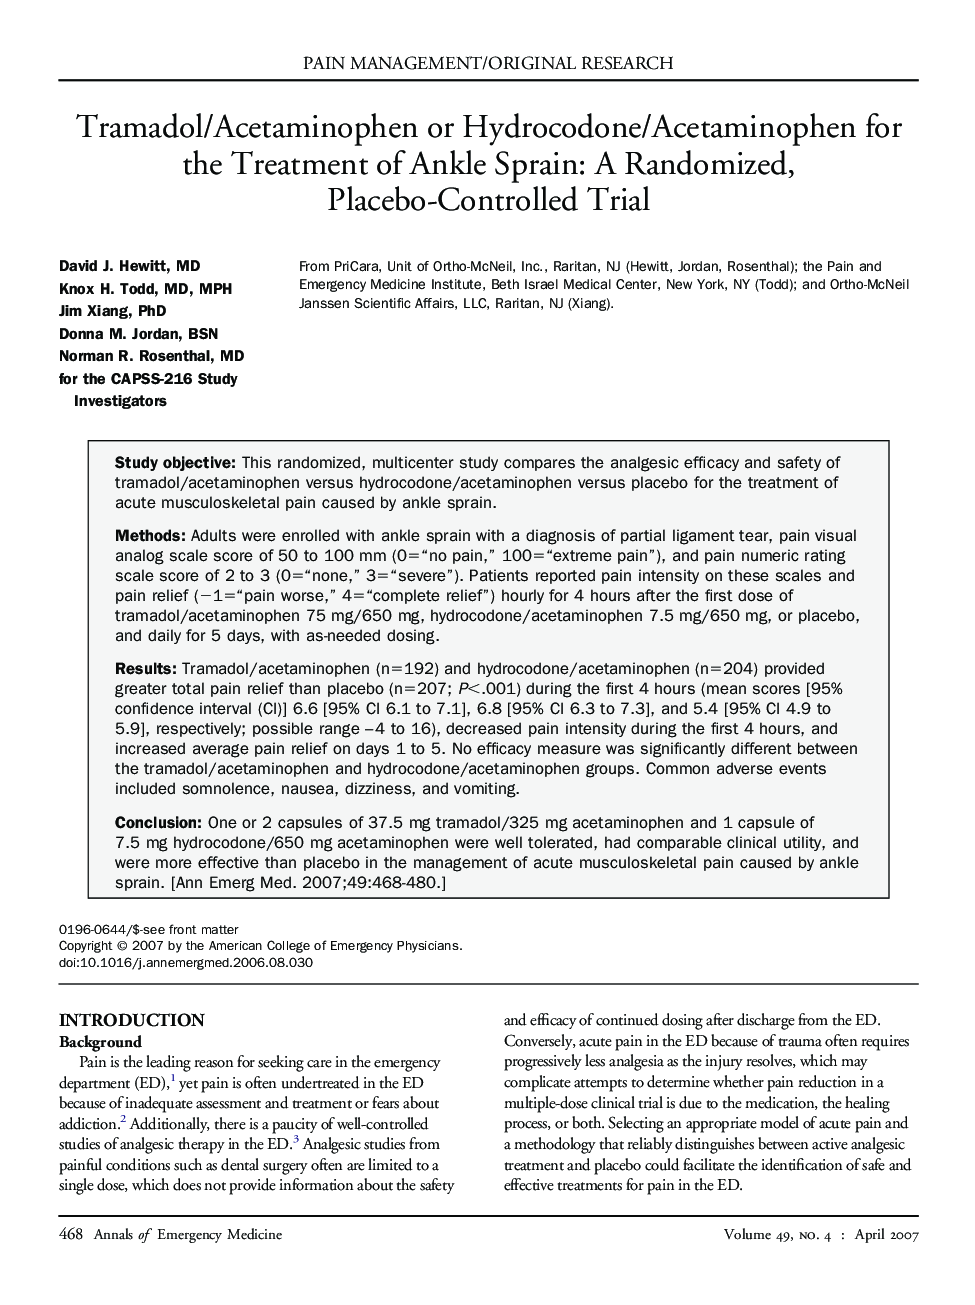 Tramadol/Acetaminophen or Hydrocodone/Acetaminophen for the Treatment of Ankle Sprain: A Randomized, Placebo-Controlled Trial